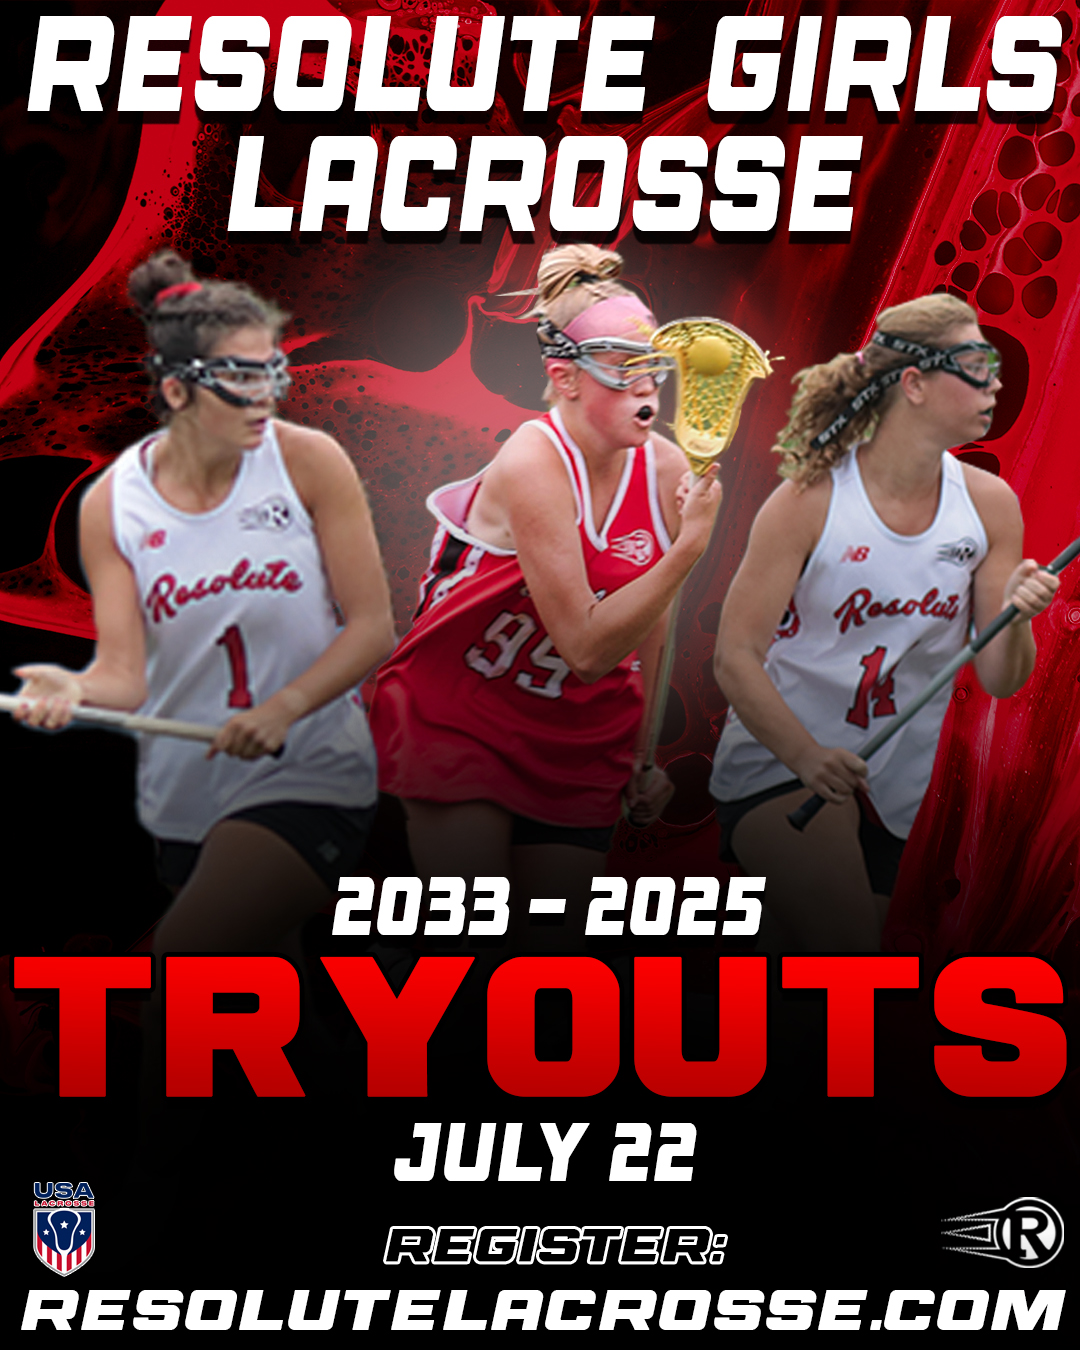 Girls Tryout Graphic copy